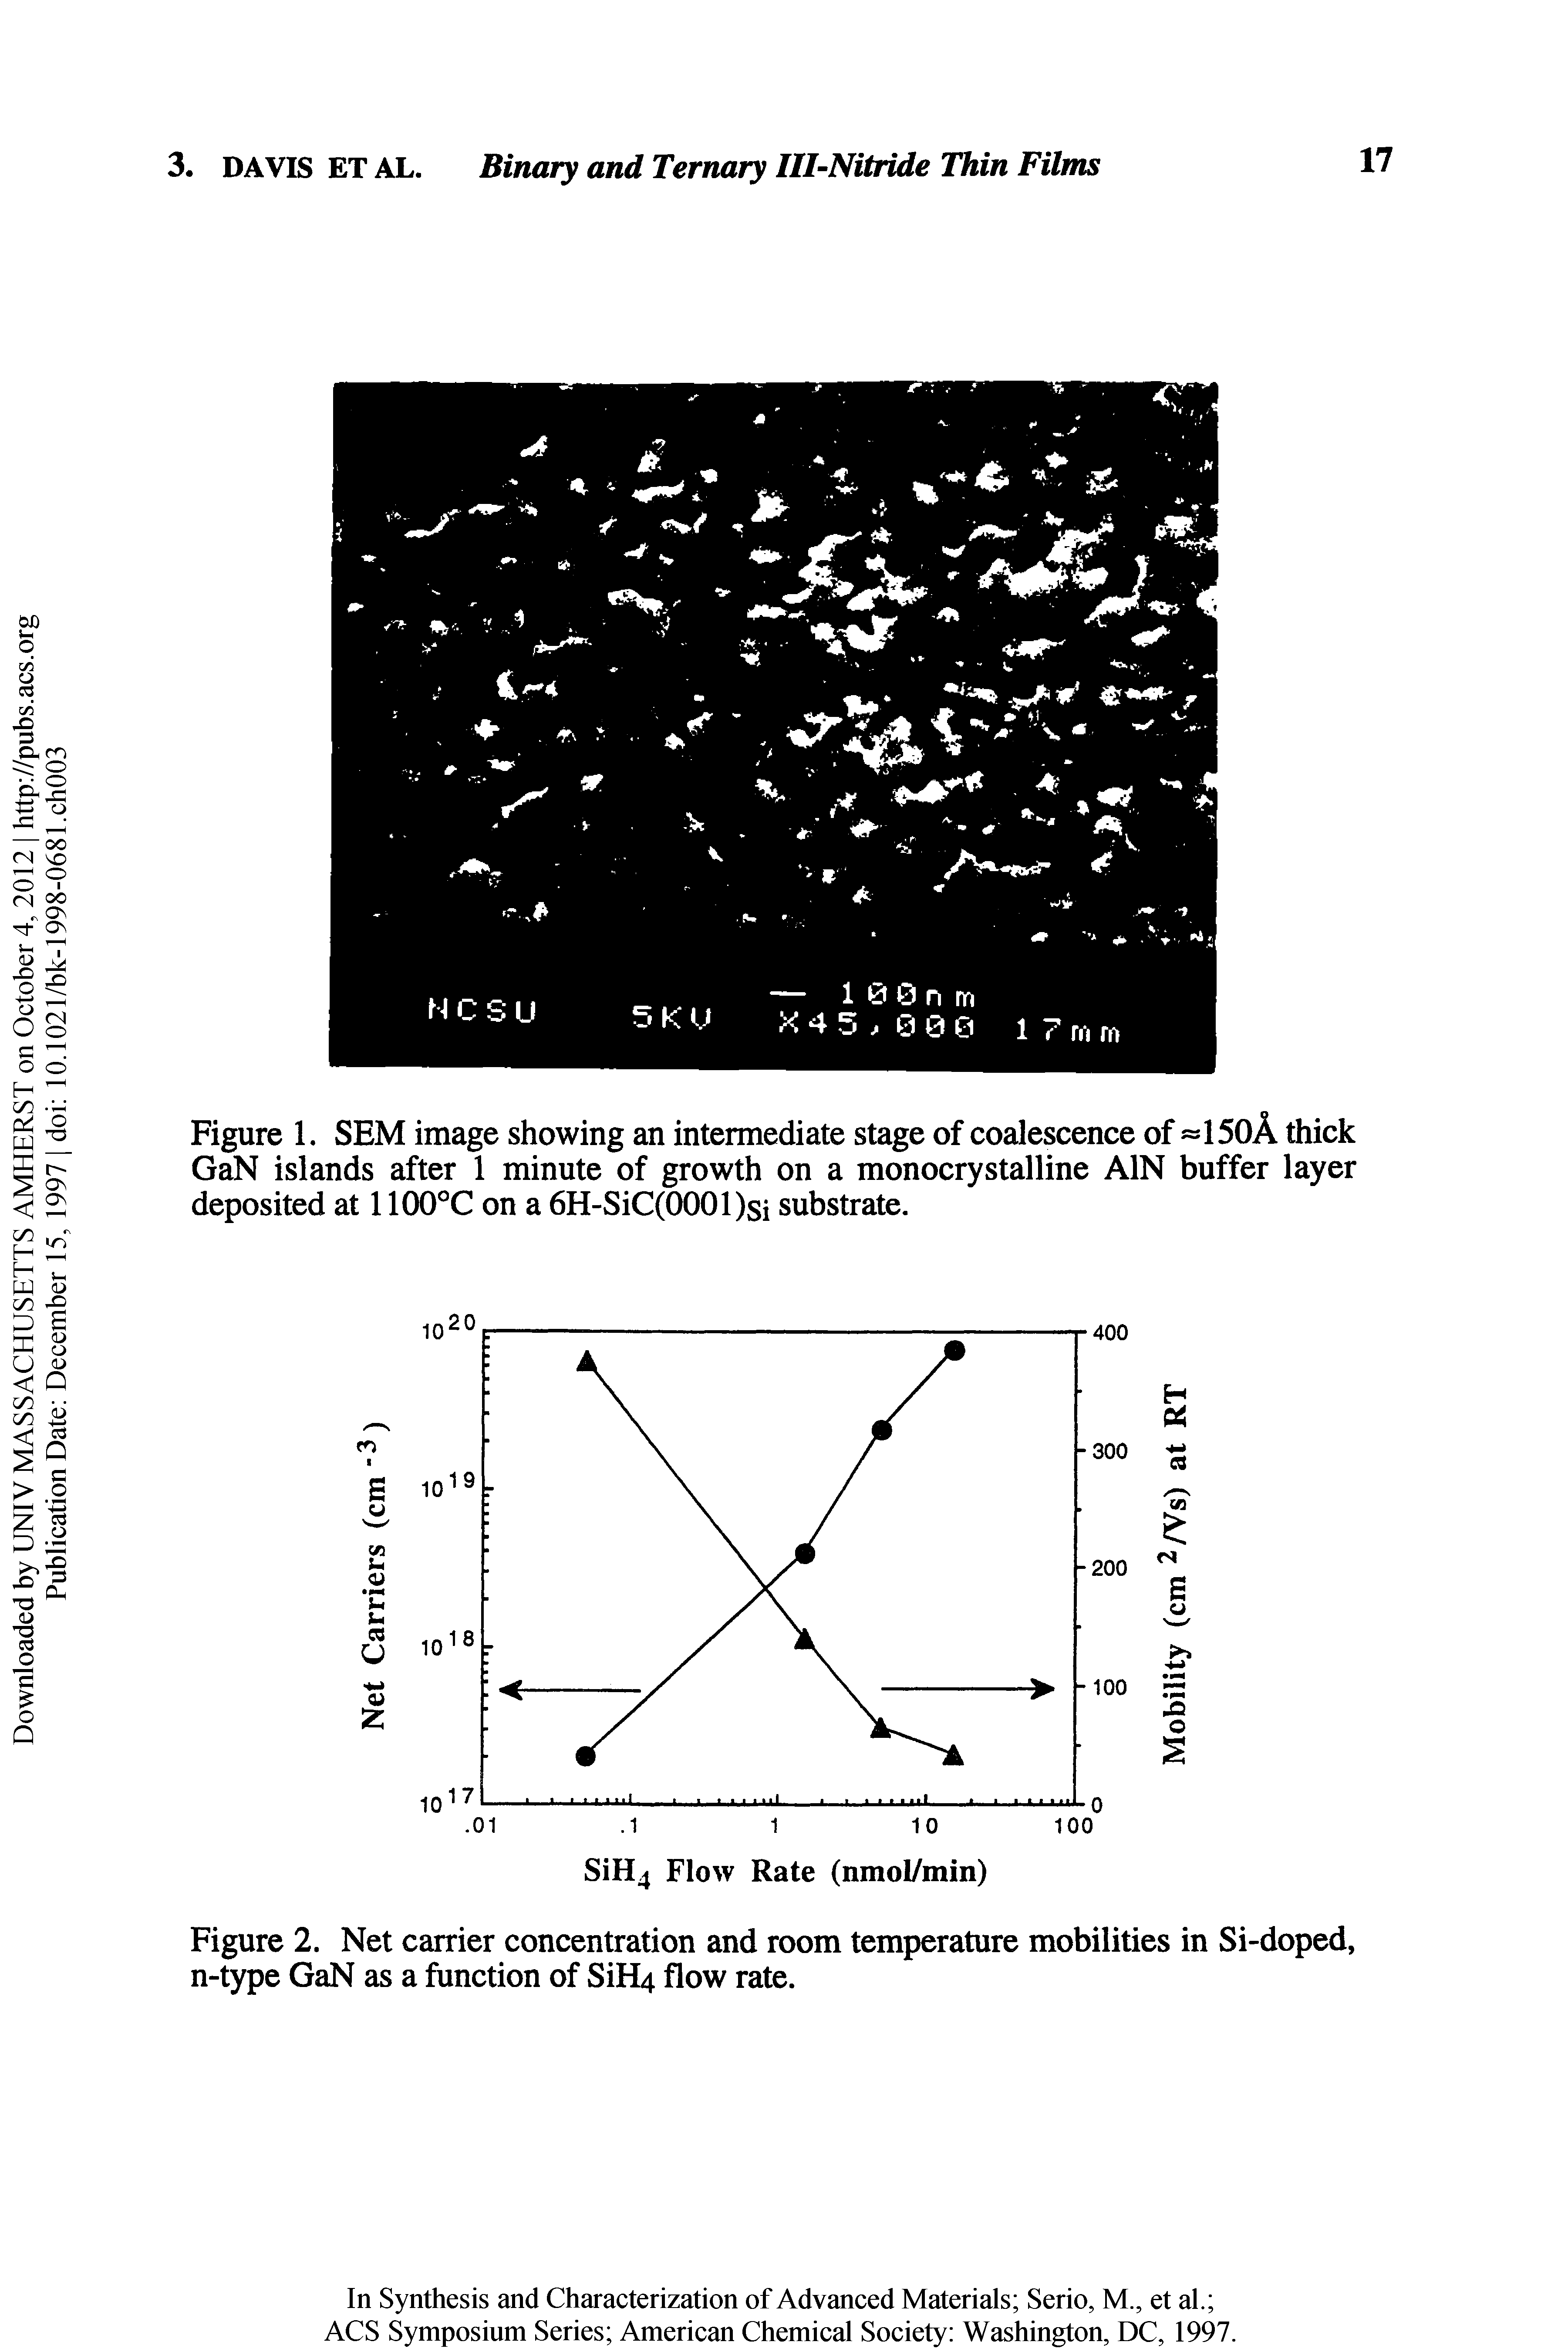 Figure 2. Net carrier concentration and room temperature mobilities in Si-doped, n-type GaN as a function of SiH4 flow rate.